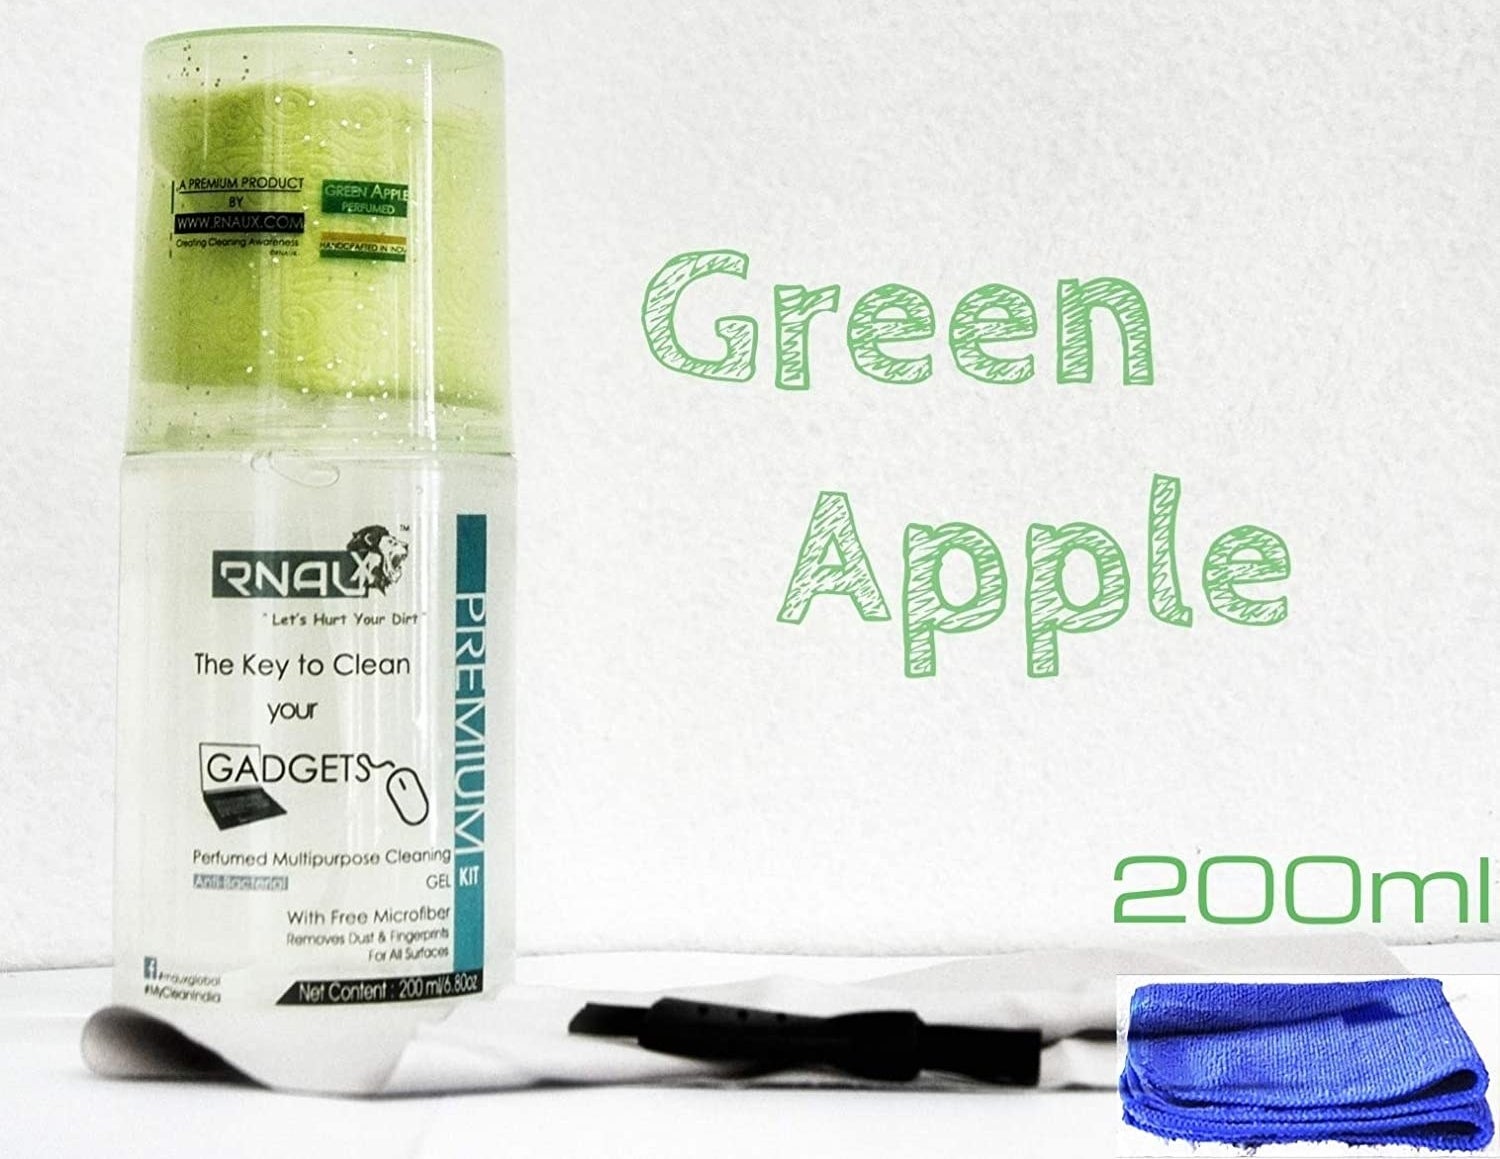 A green apple-scented cleaning solution and cleansing fabric